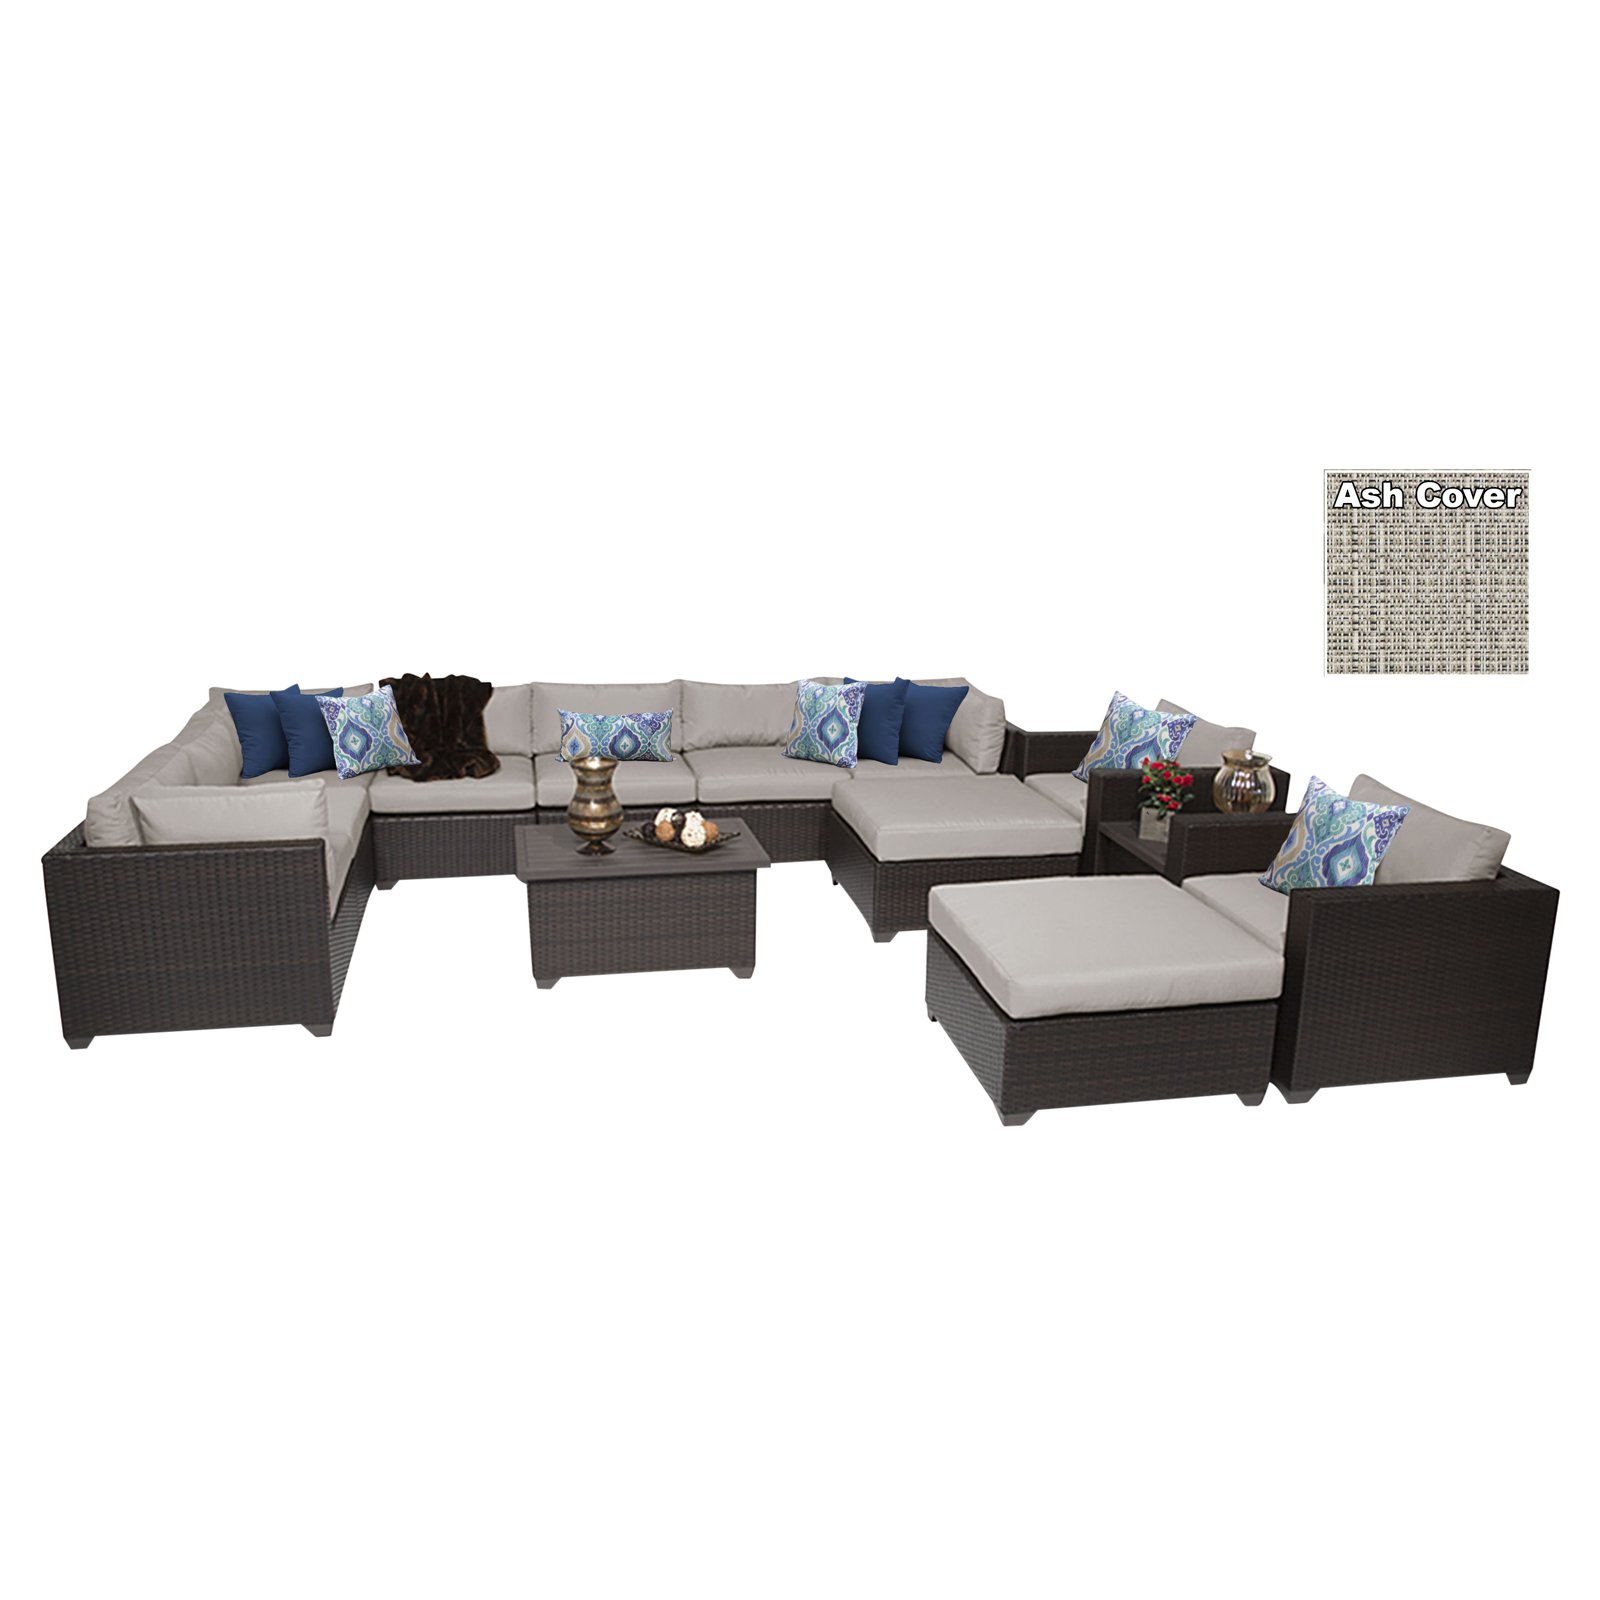 TK Classics Belle Wicker 13 Piece Patio Conversation Set with 2 Sets of Cushion Covers - image 1 of 2